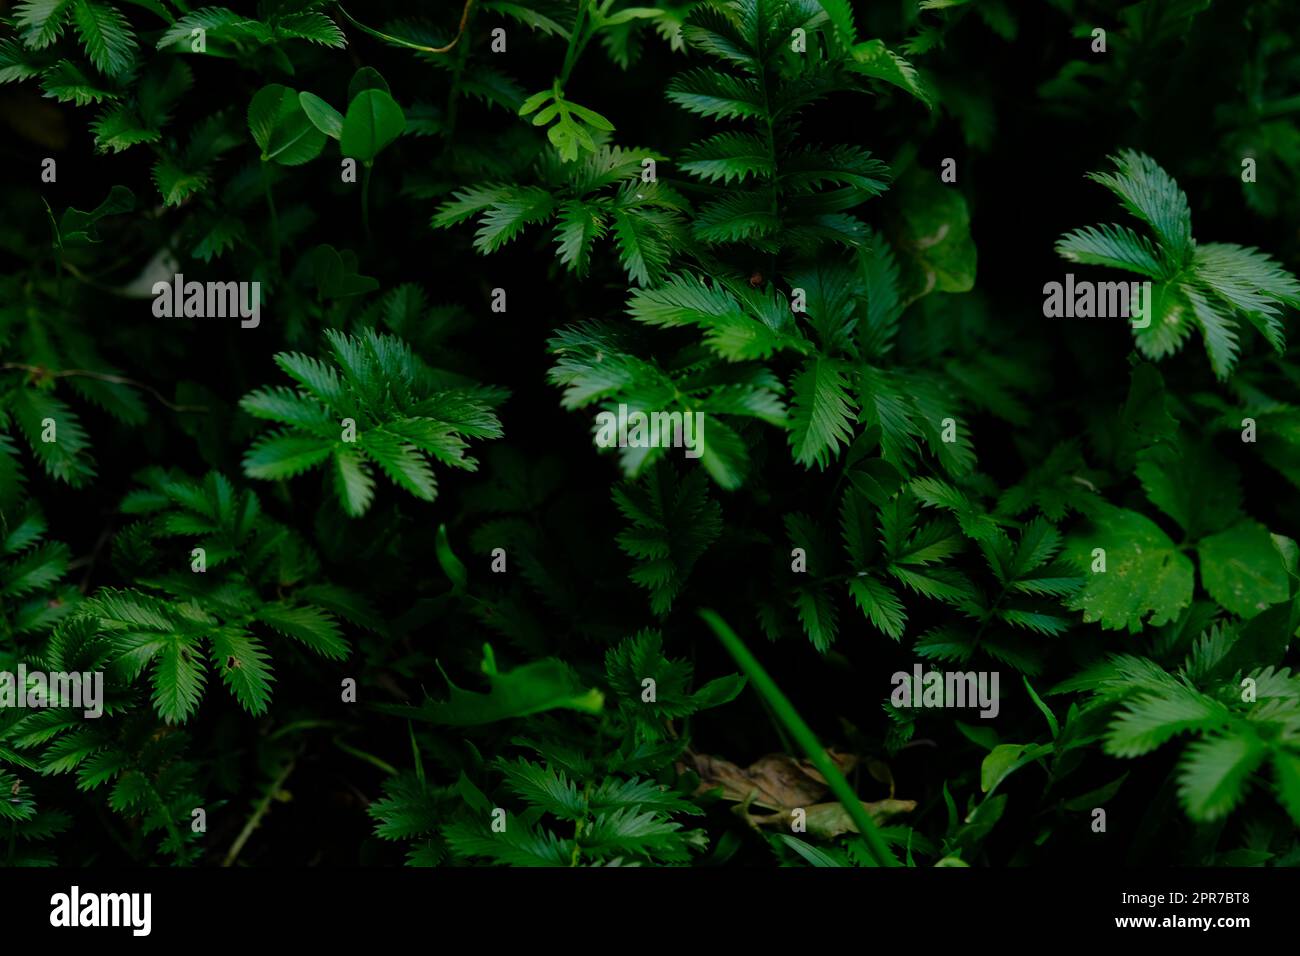 Ferns in the forest Beautiful ferns leaves green foliage. Close up of beautiful growing ferns in the forest. Natural floral fern background in sunlight. Stock Photo